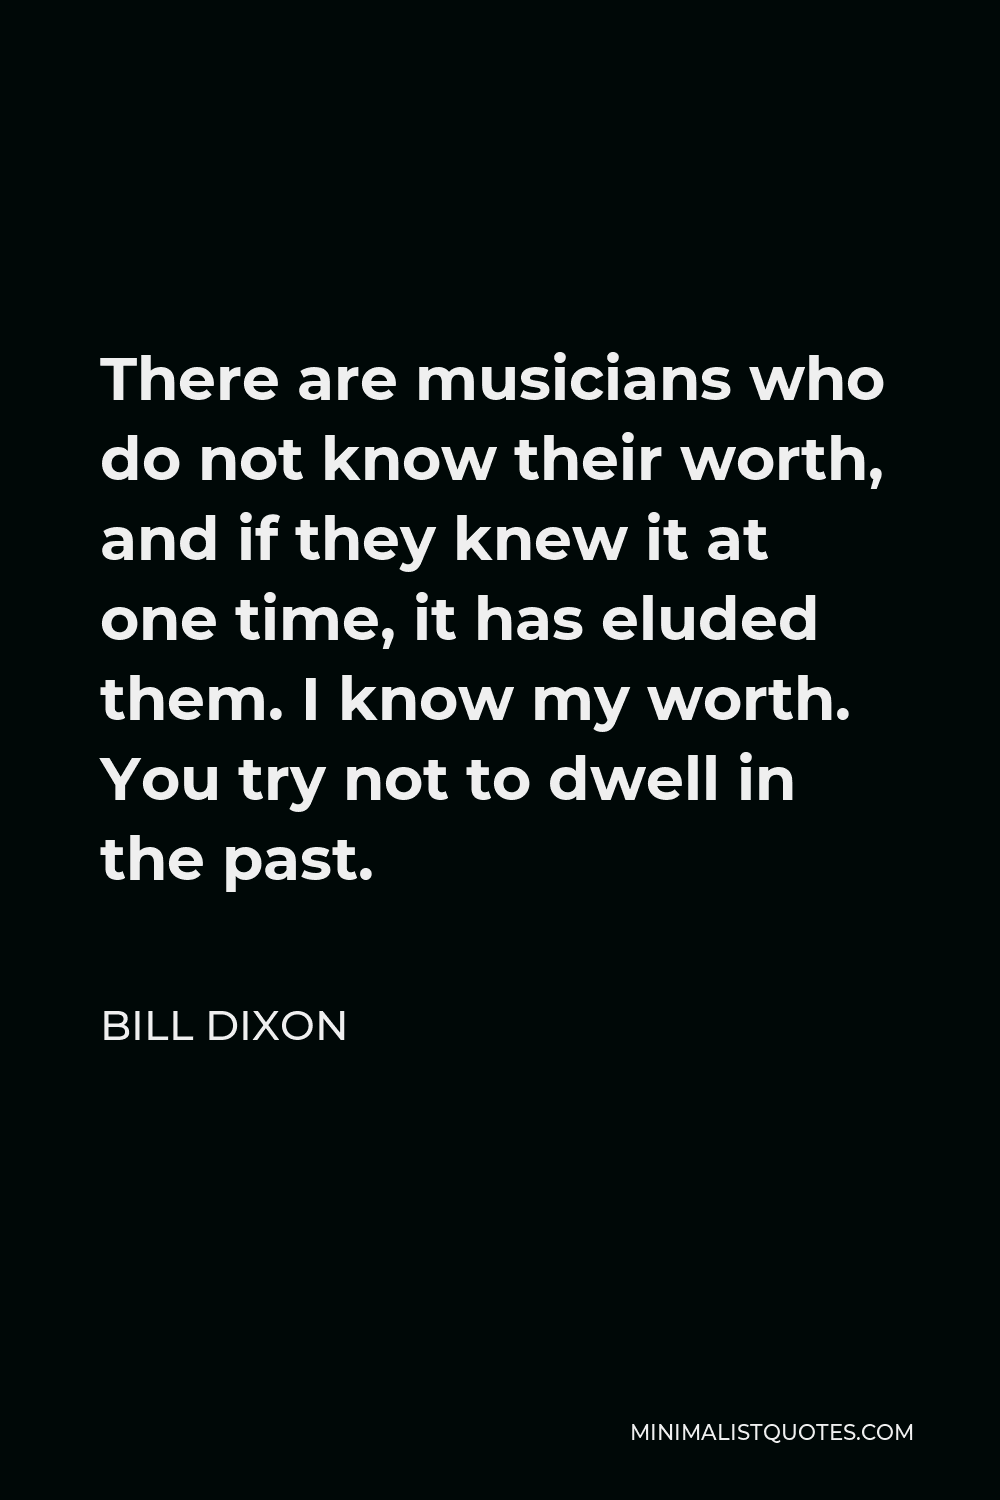 Bill Dixon Quote - There are musicians who do not know their worth, and if they knew it at one time, it has eluded them. I know my worth. You try not to dwell in the past.